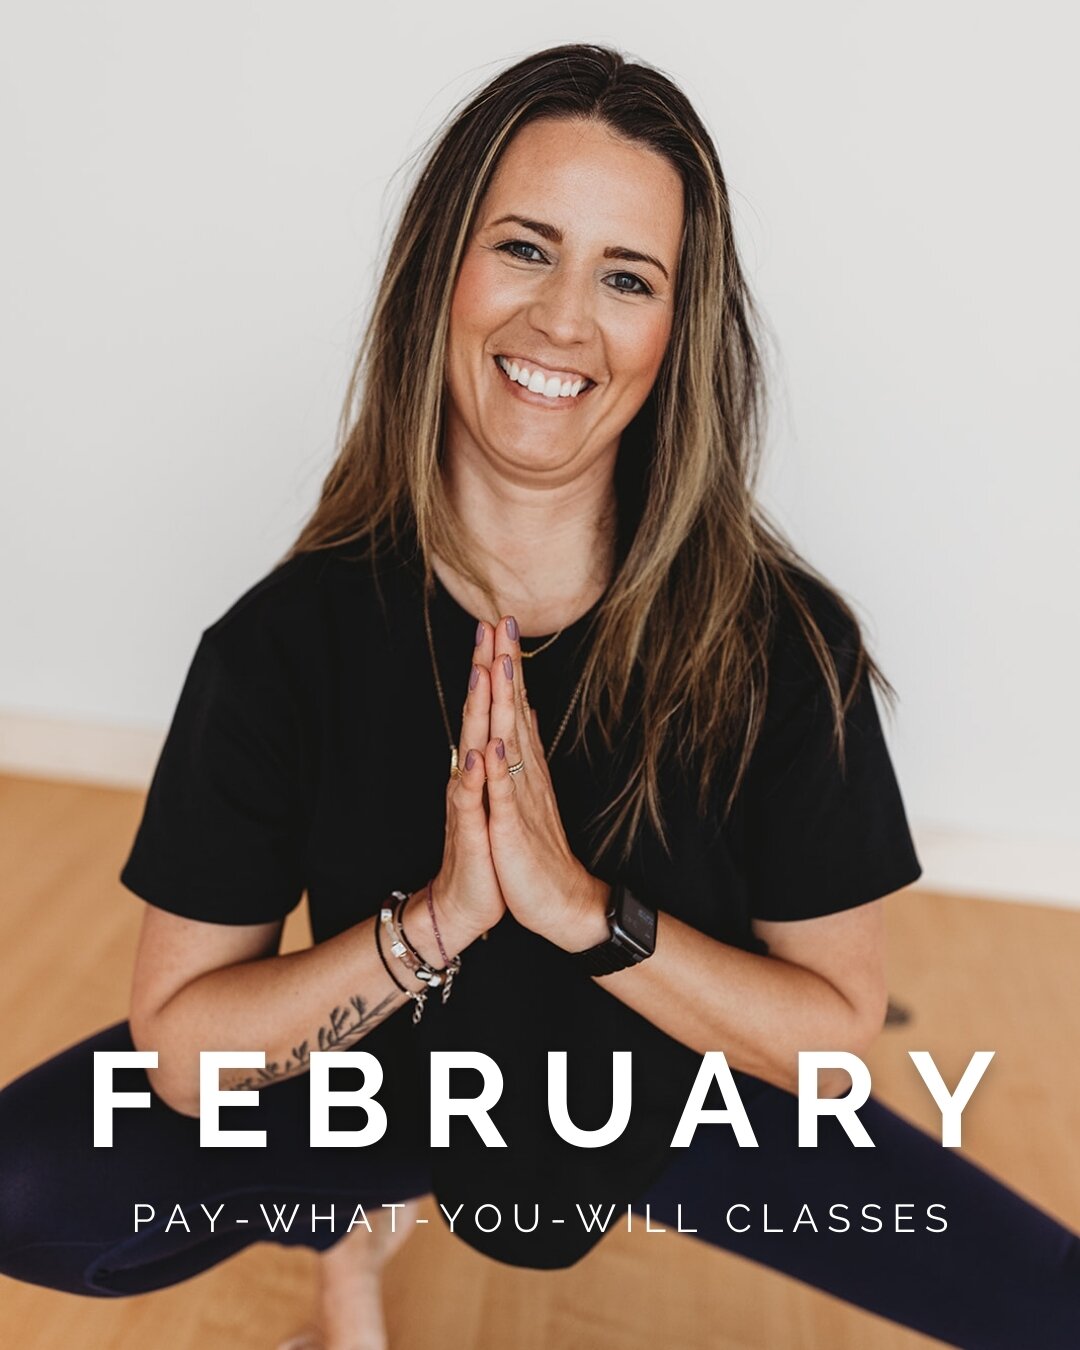 We&rsquo;re so proud to continue to offer three weekly classes at a pay-what-you-will rate ($5, $10, $20, or $30). Check out our February classes, and the incredible teachers guiding. 

Proceeds from these classes go towards our teacher training scho